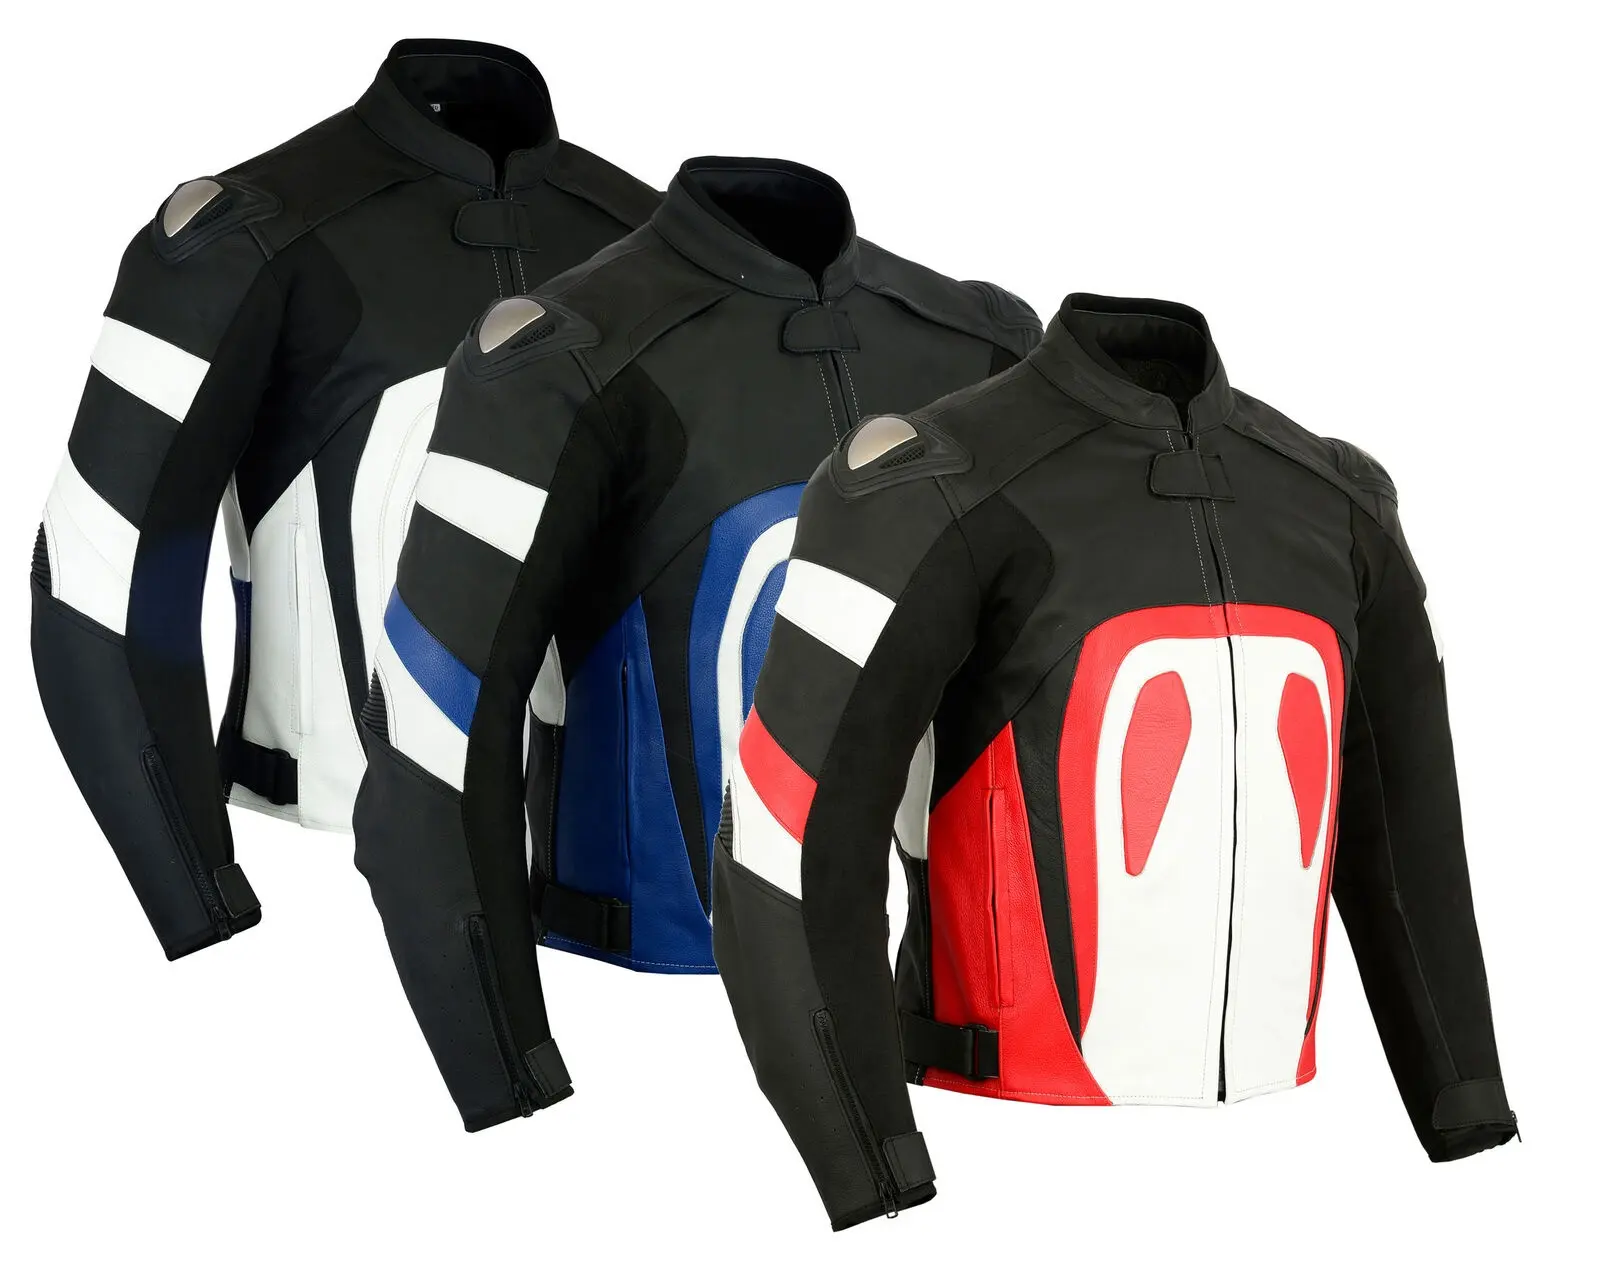 New OEM Motorbike Racing Wear 2022 Leather Jacket Custom Made To Order Moto GP Armor Protection Riding Cafe Racer Bikers Jacket